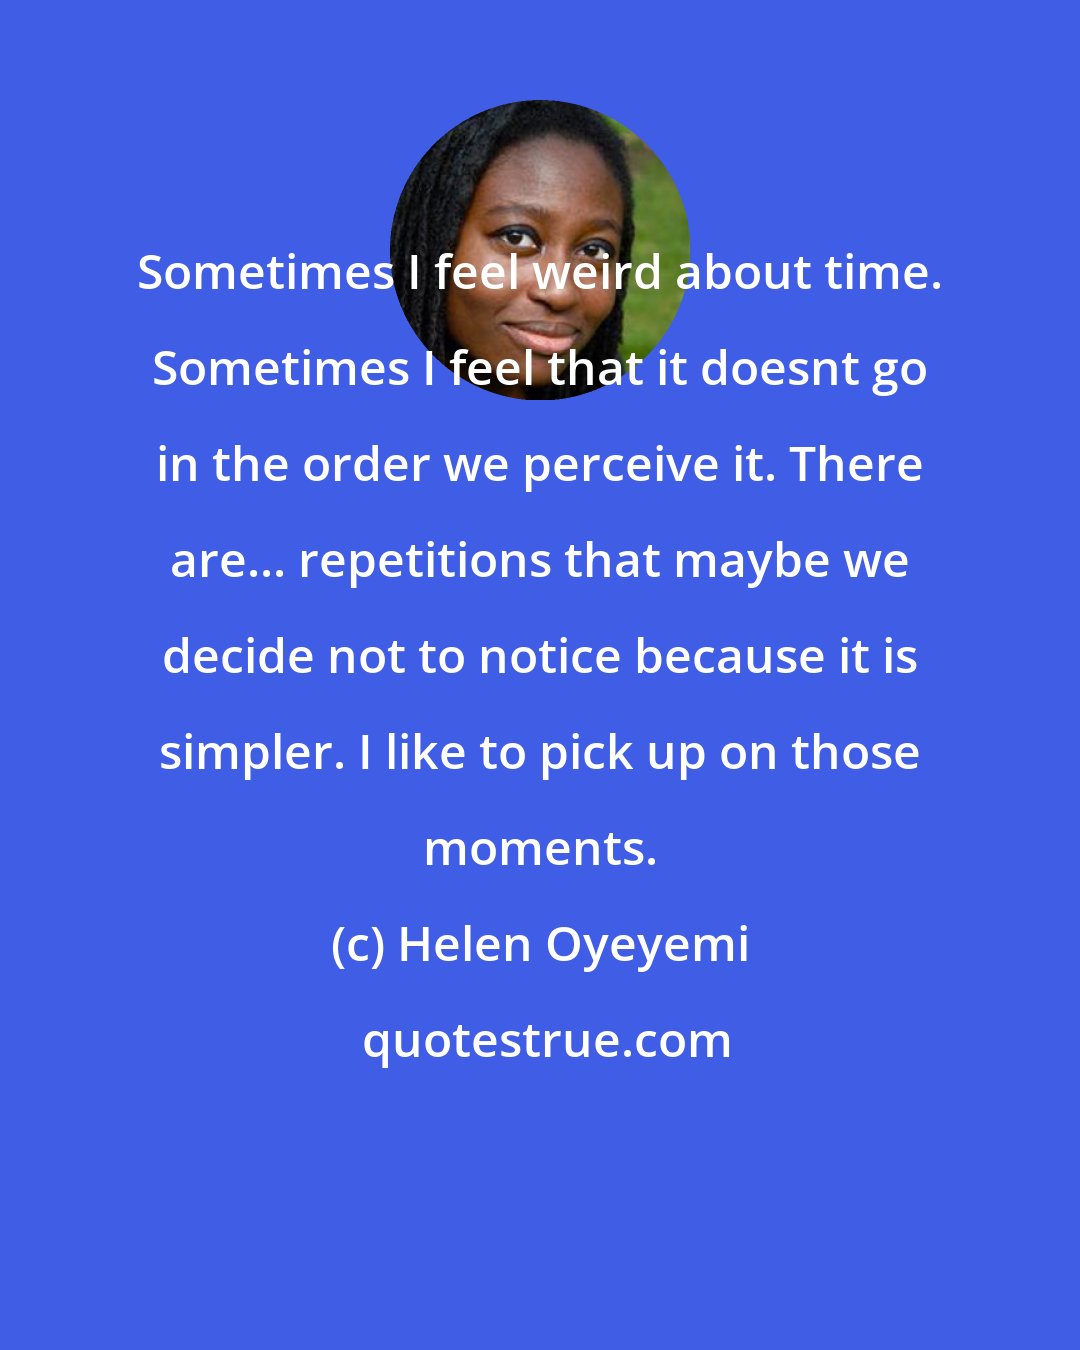 Helen Oyeyemi: Sometimes I feel weird about time. Sometimes I feel that it doesnt go in the order we perceive it. There are... repetitions that maybe we decide not to notice because it is simpler. I like to pick up on those moments.